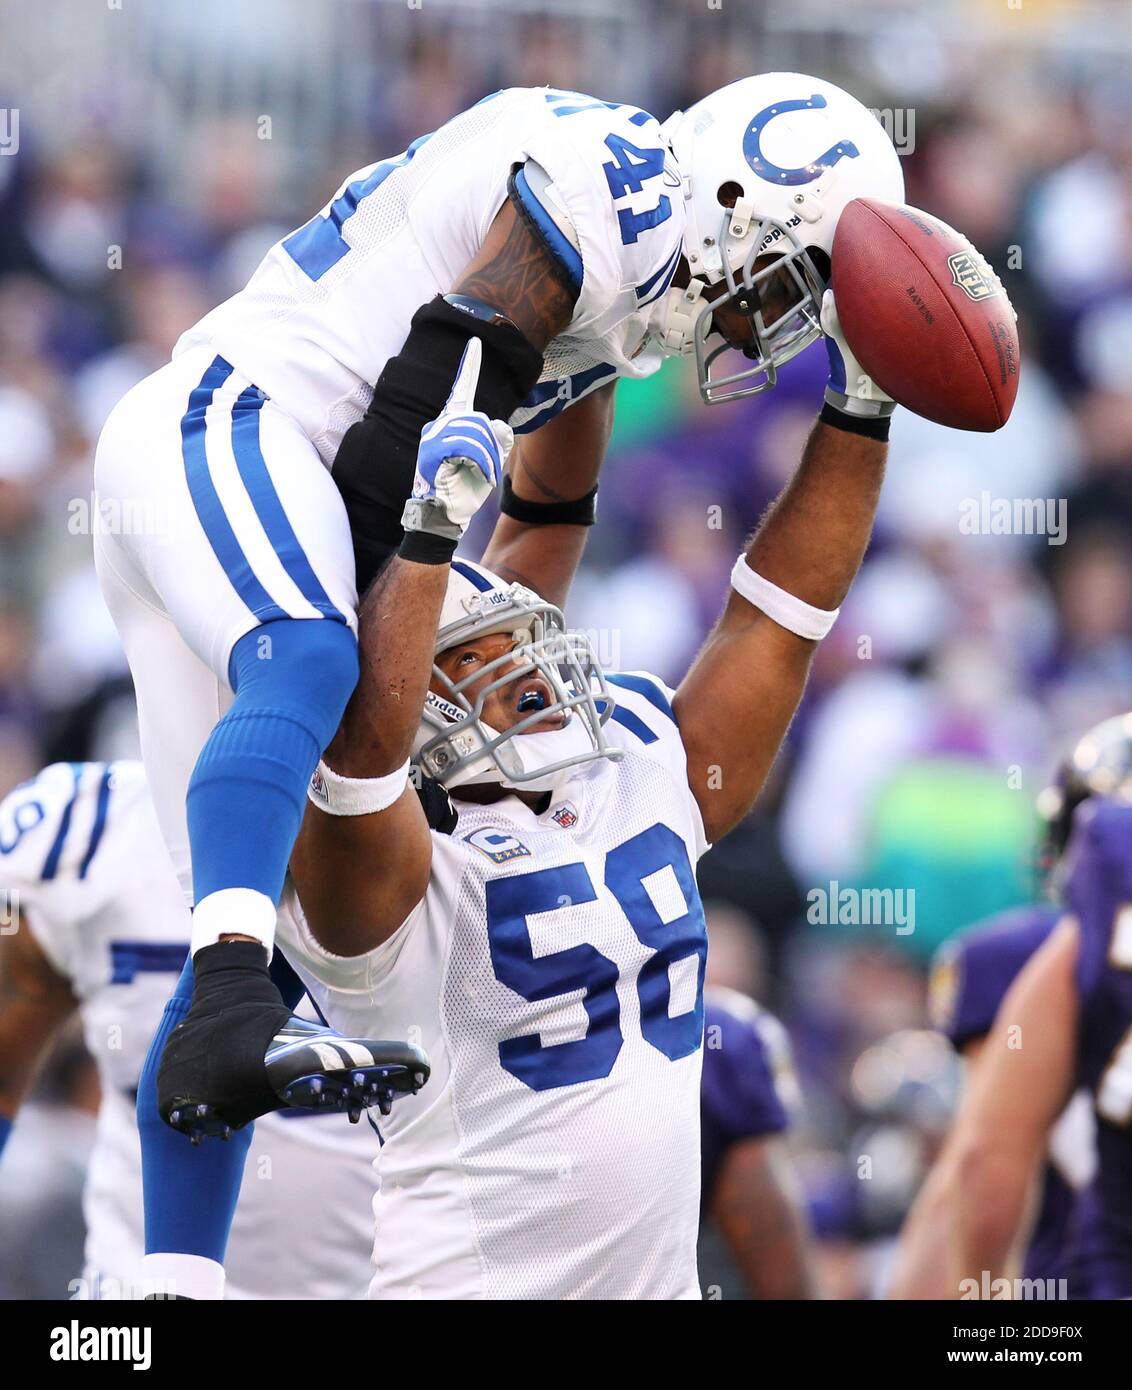 NO FILM, NO VIDEO, NO TV, NO DOCUMENTARY - Gary Brackett (58) and Antoine Bethea (41) of the Indianapolis Colts celebrate Brackett's interception against the Baltimore Ravens in the second half of their game in Baltimore, MD, USA on November 22, 2009. Photo by George Bridges/MCT/Cameleon/ABACAPRESS.COM Stock Photo